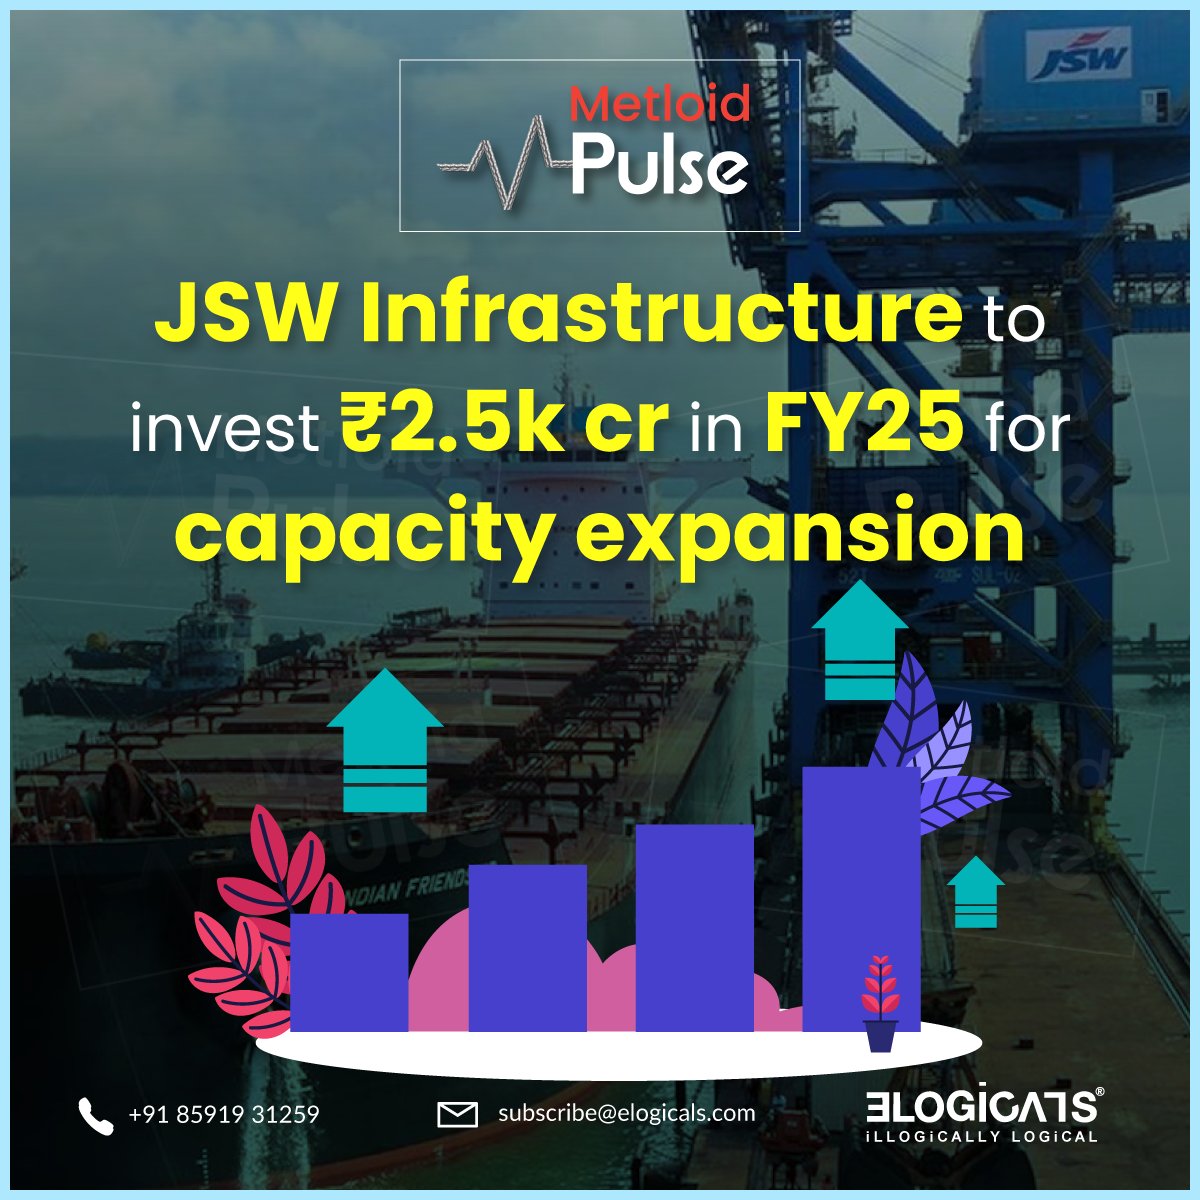 #JSWInfrastructure gears up for a robust FY25, earmarking ₹2.5k cr for expanding capacity. @TheJSWGroup #Investment #TheMetloid #Elogicals